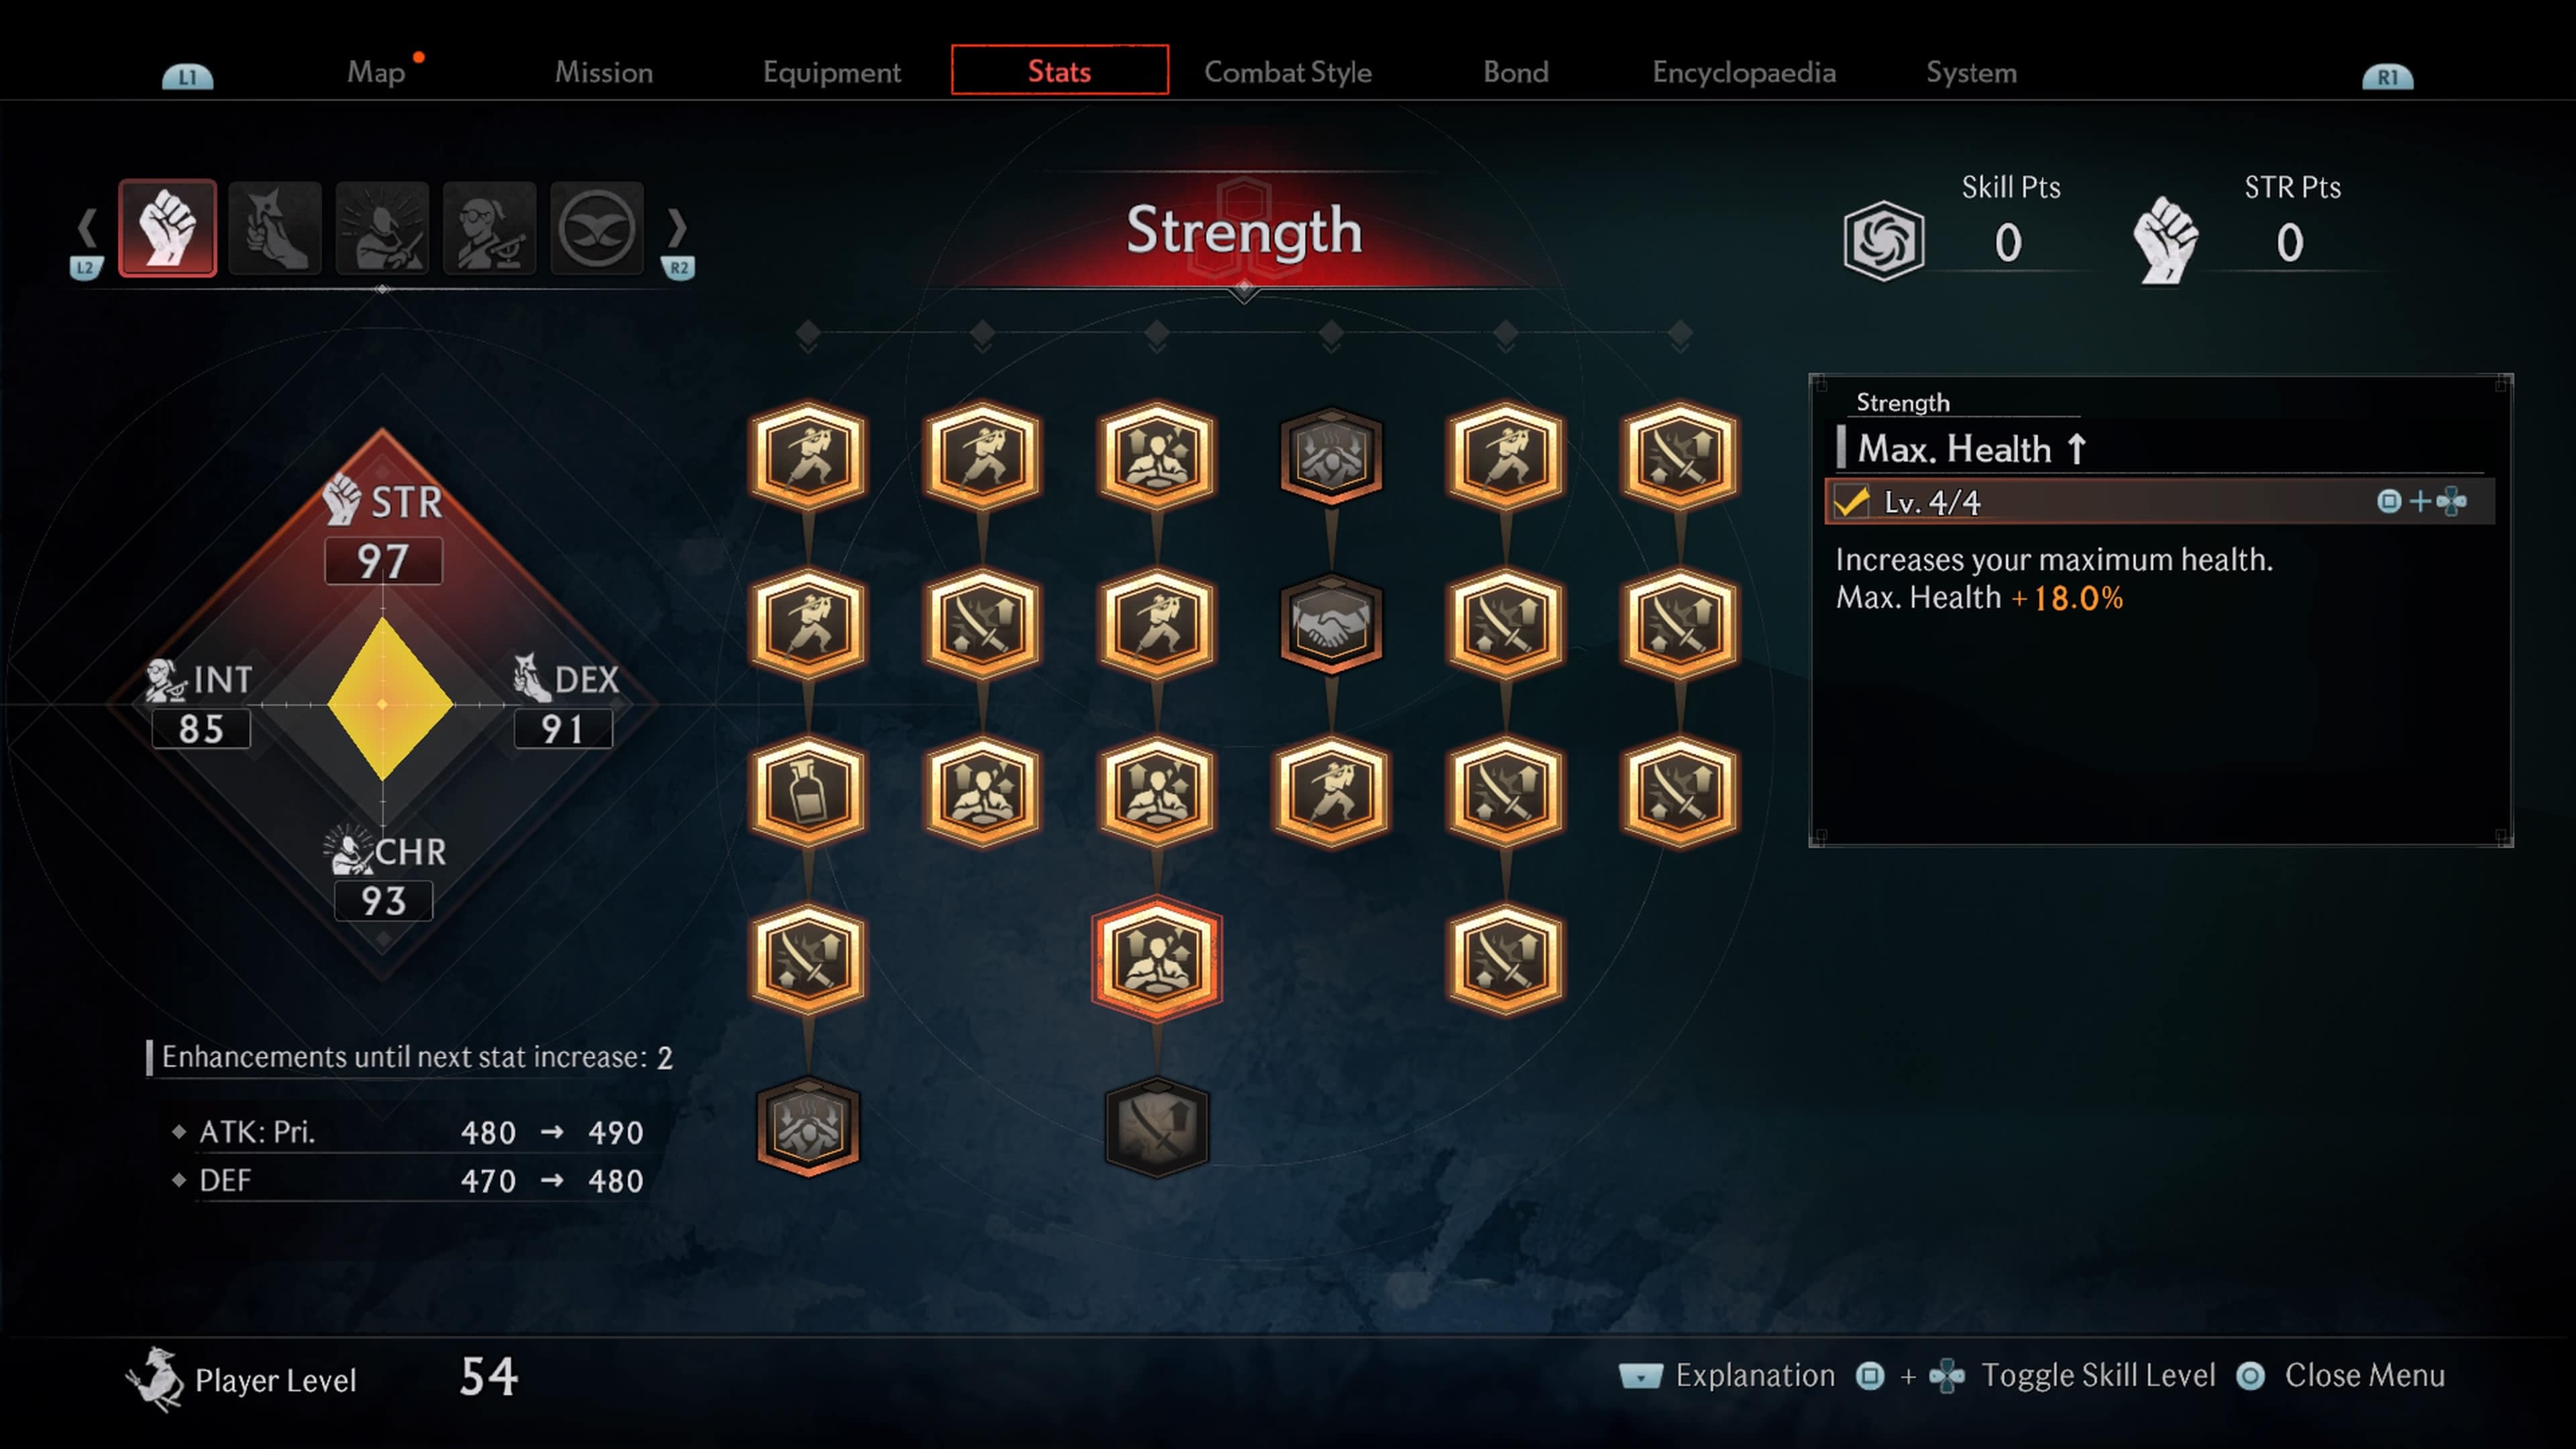 Rise of the Ronin tips and tricks - the skill tree in the game showing available skills